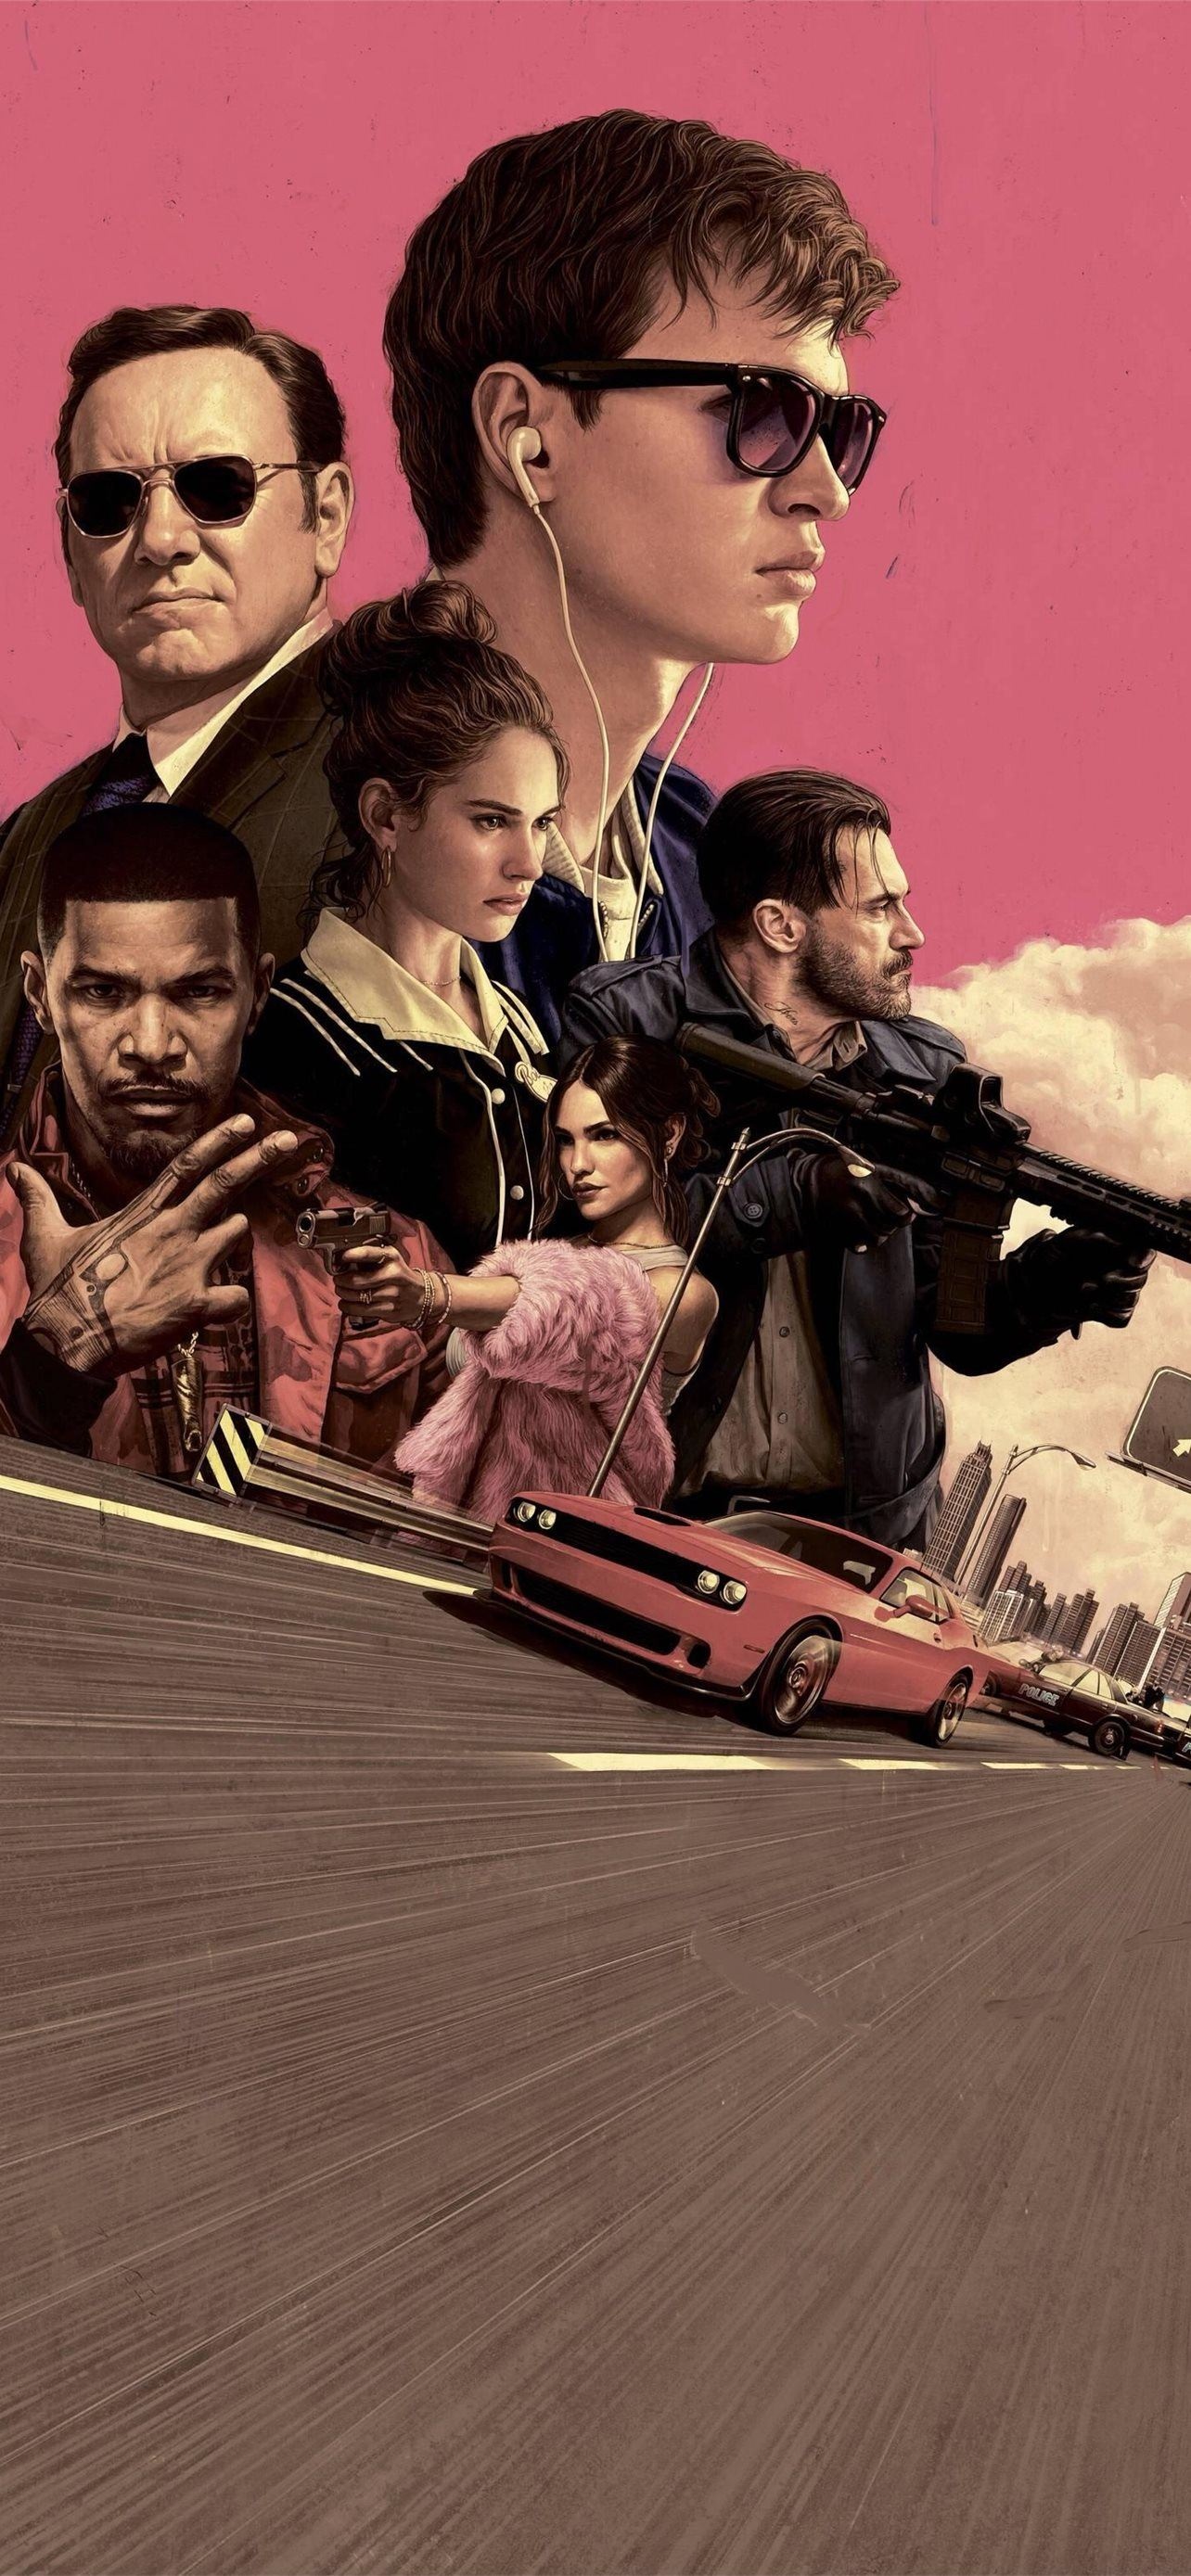 Baby Driver iPhone wallpapers, Stylish images, Movie characters, Speedy cars, 1290x2780 HD Handy